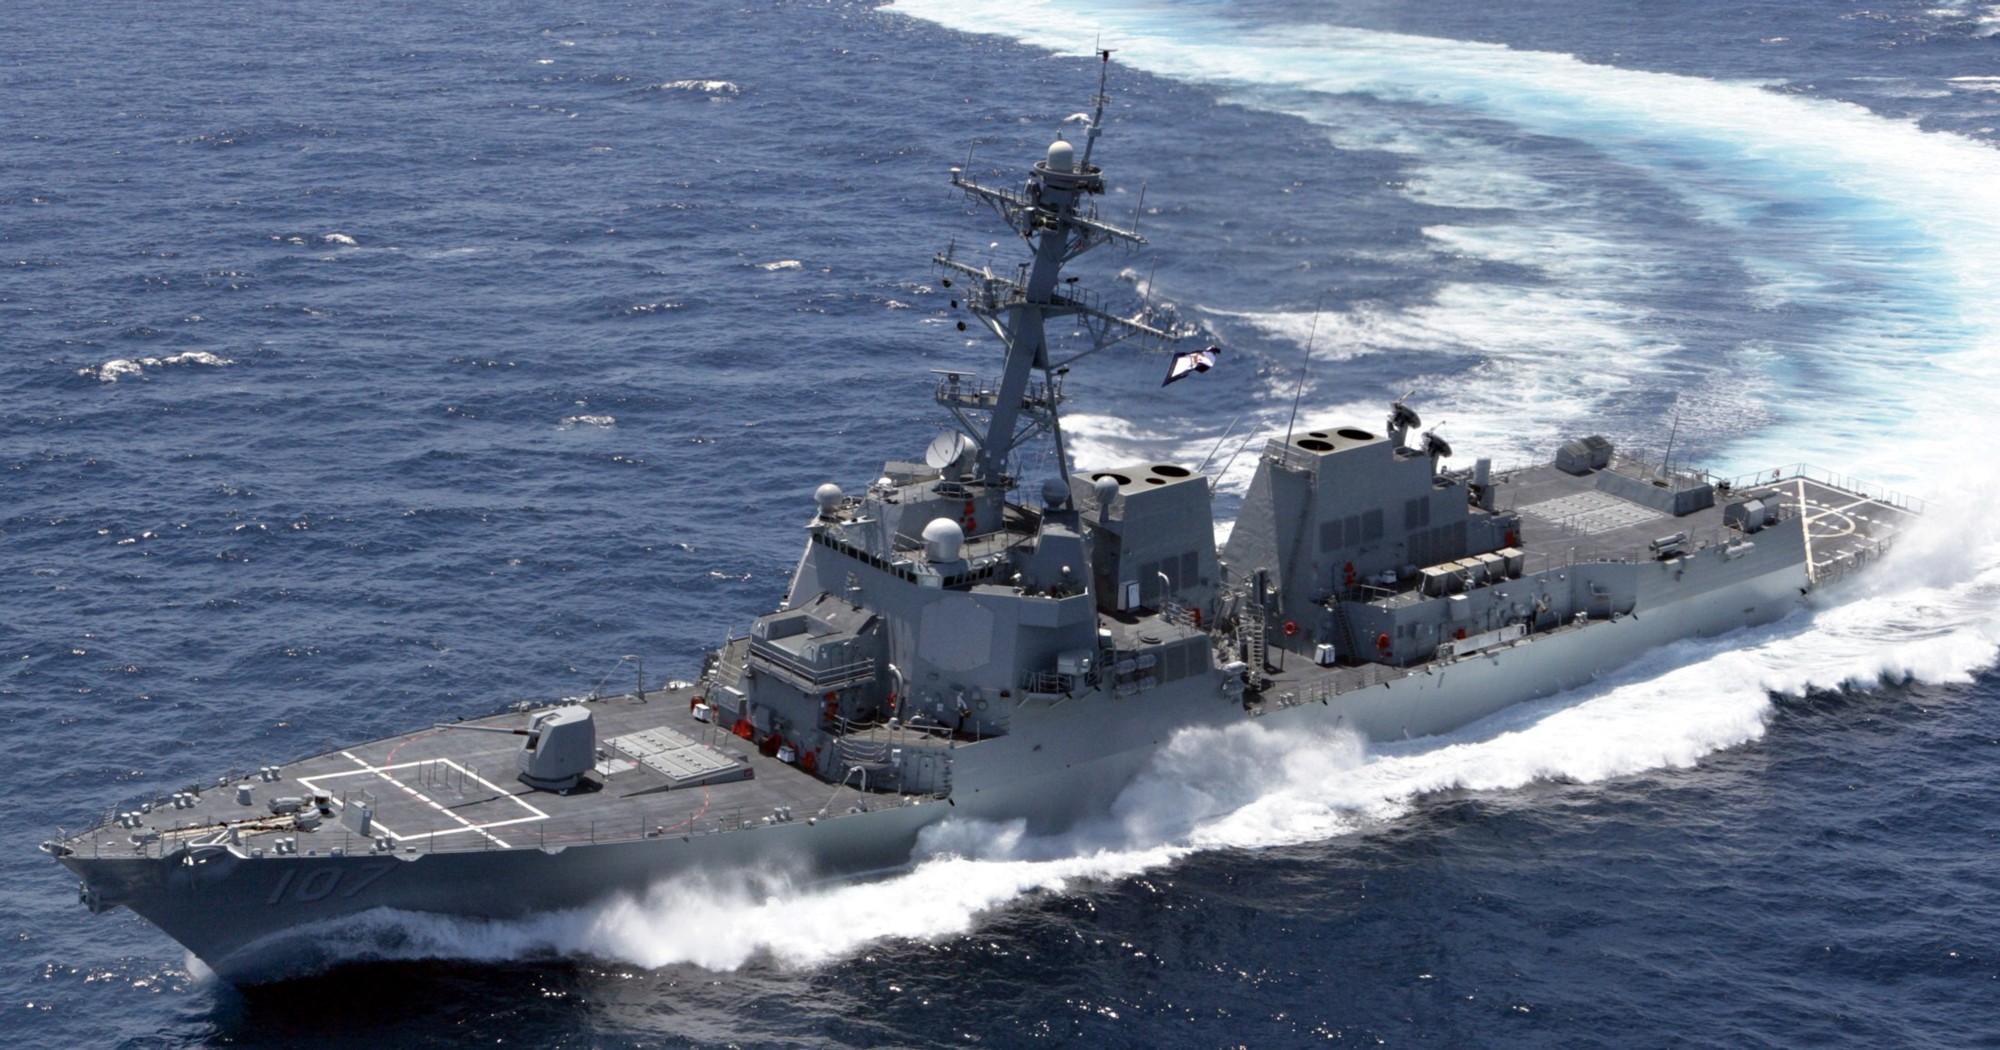 ddg-107 uss gravely arleigh burke class guided missile destroyer aegis us navy trials 35p